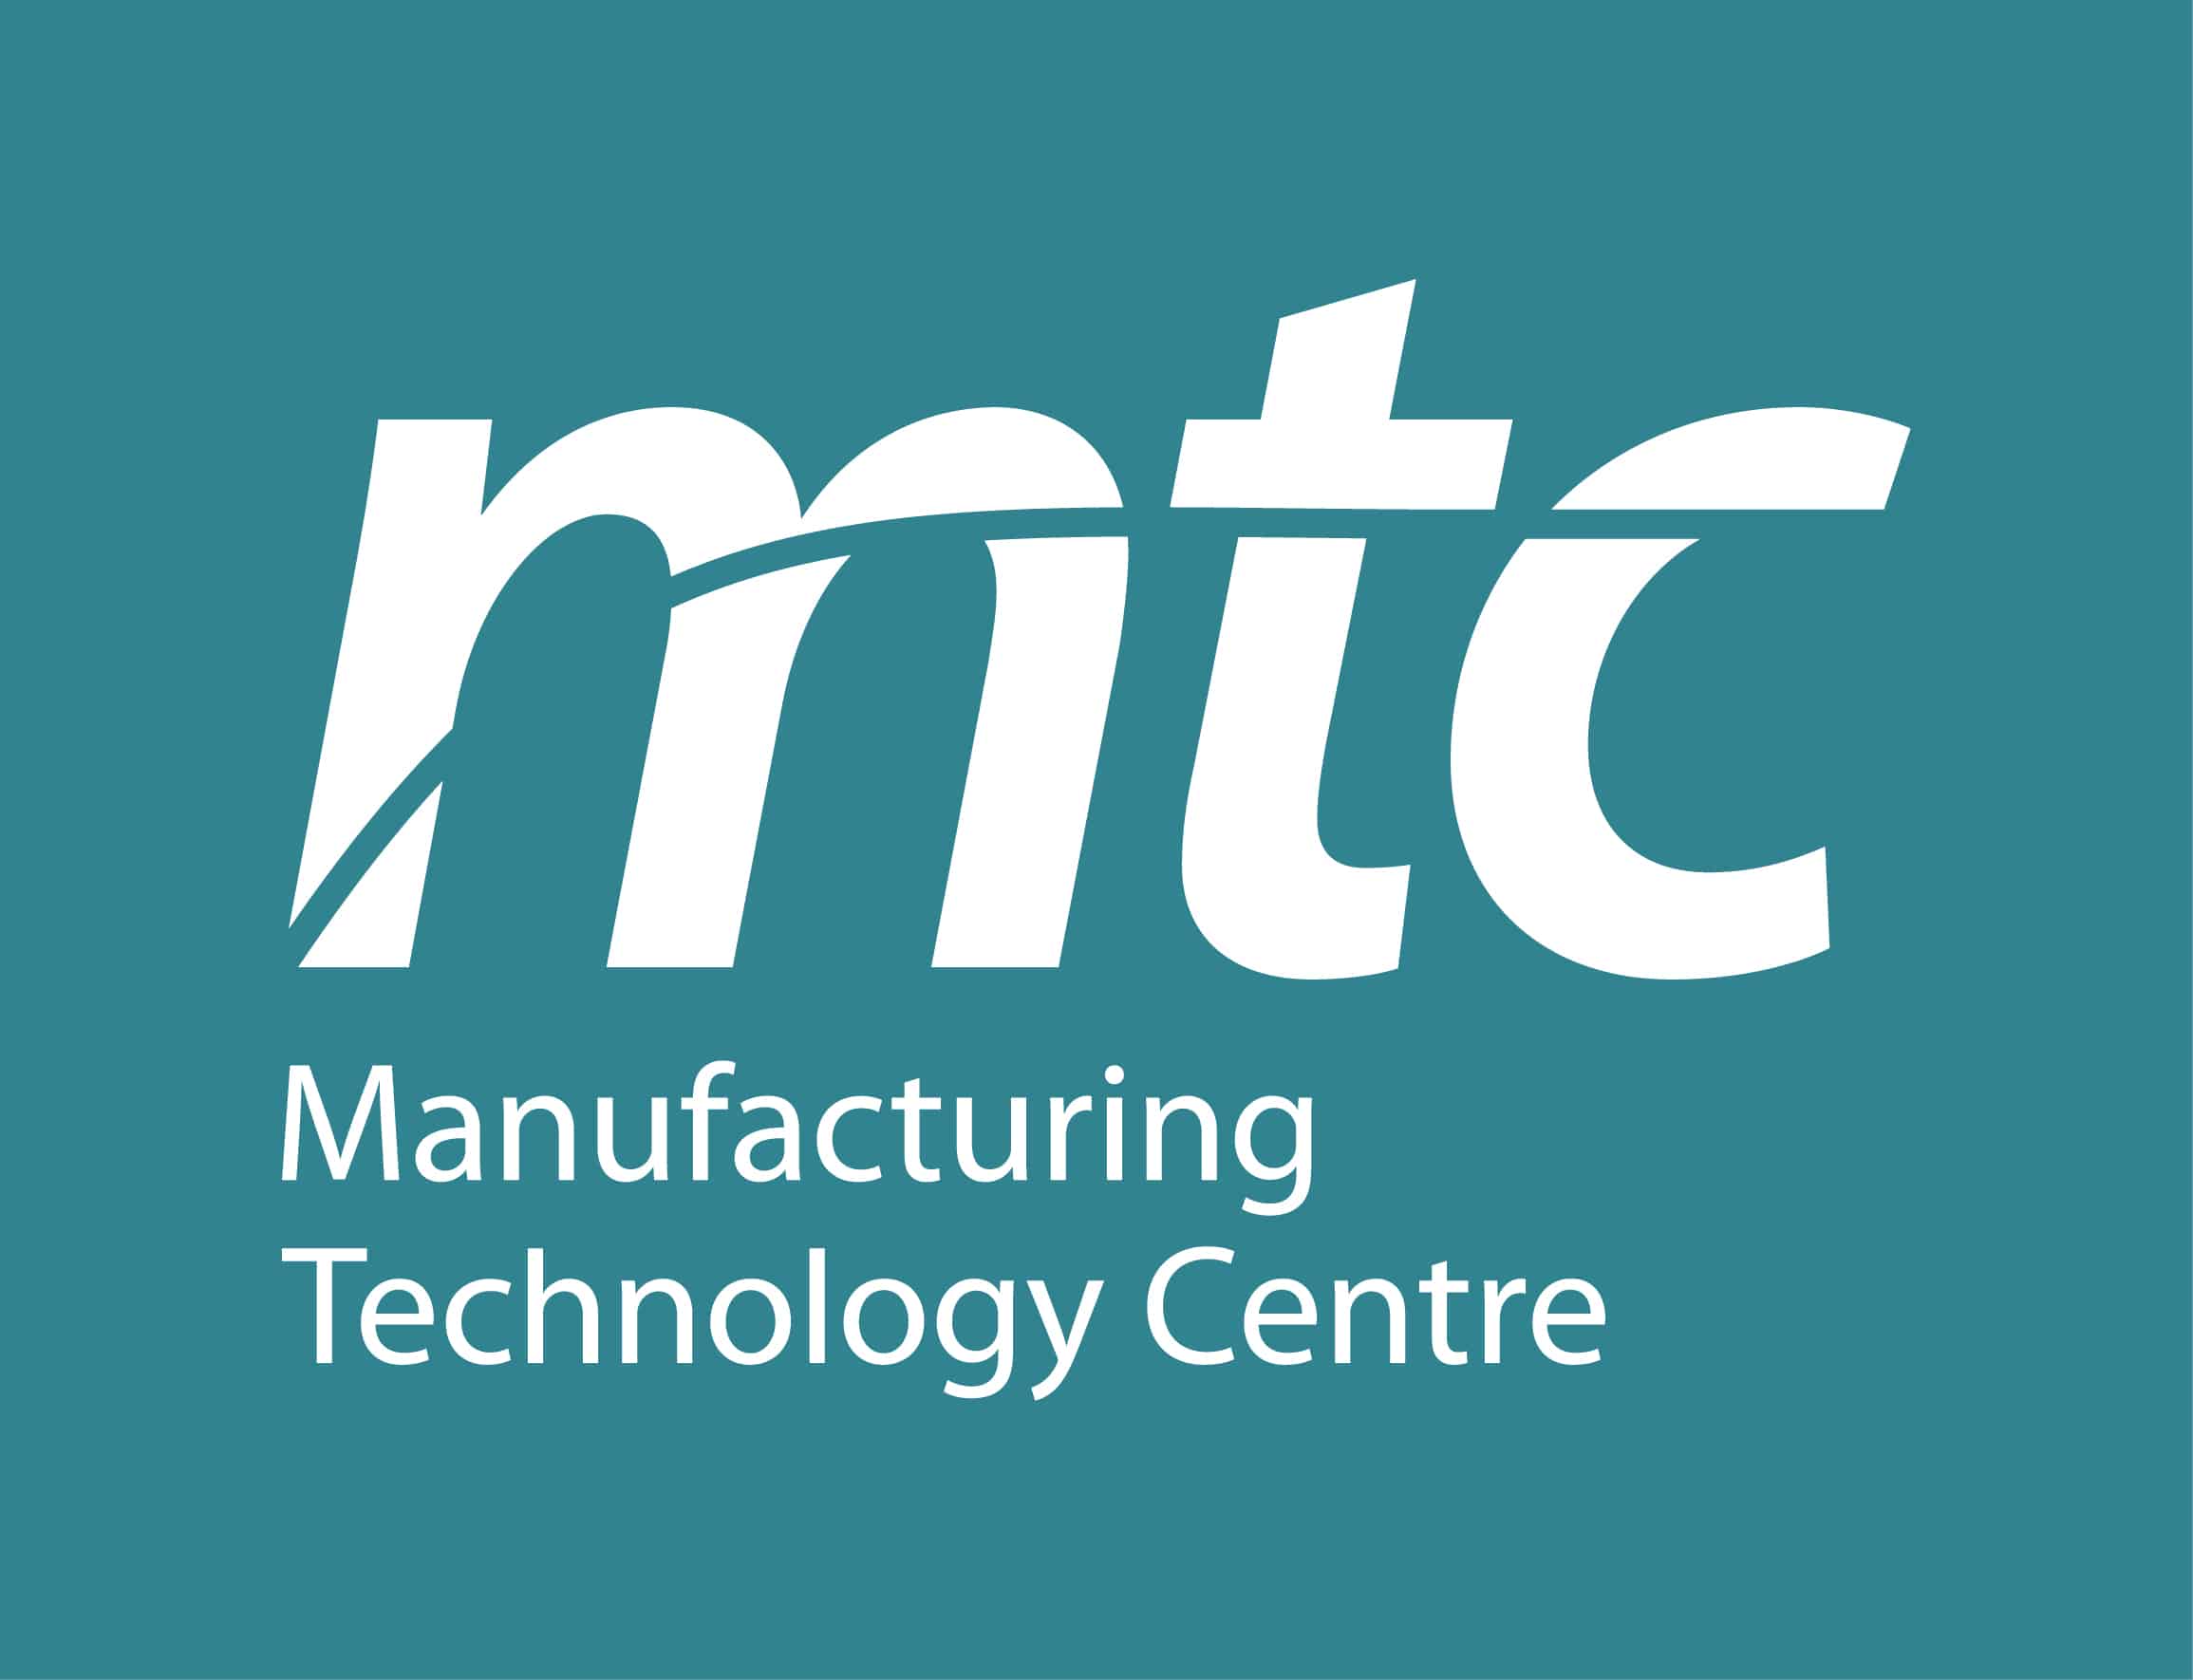 iBase-t announces expanded partnership with the Manufacturing Technology Centre (MTC)